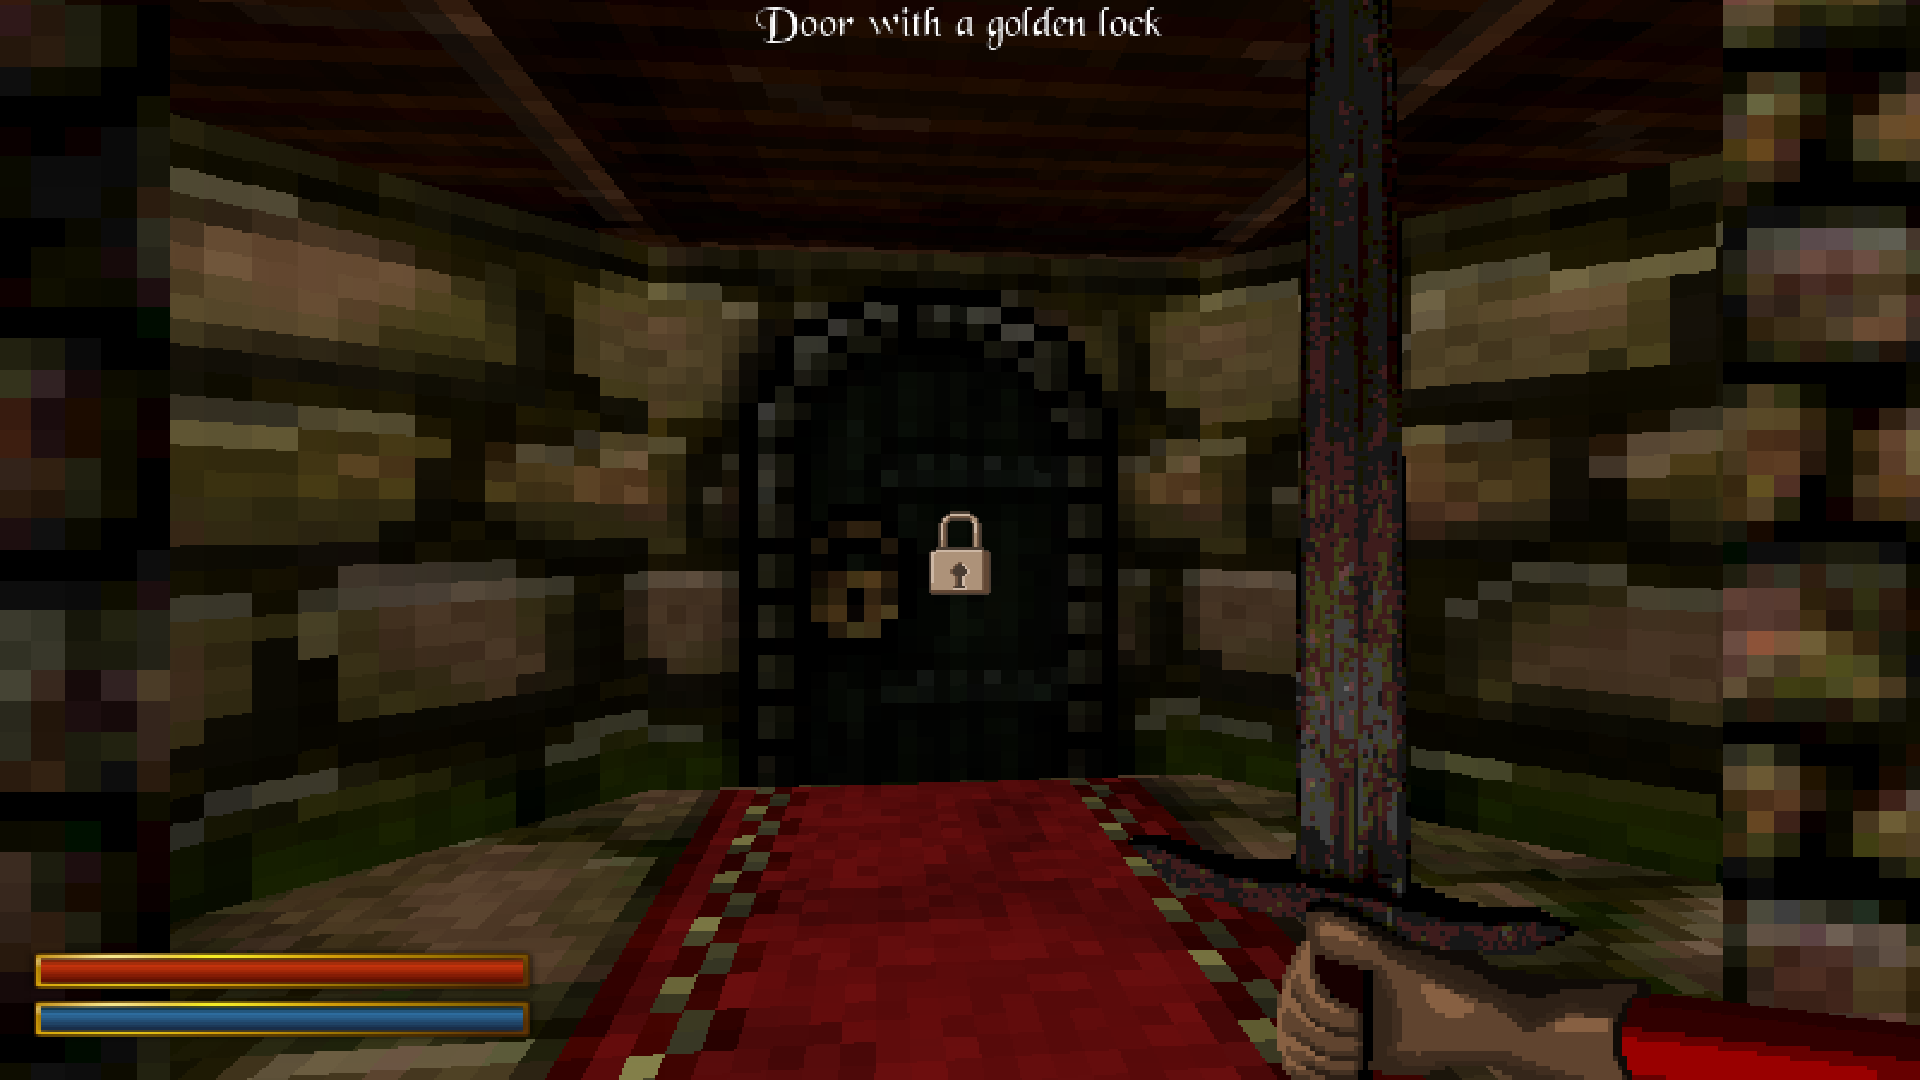 A screenshot of the game that shows a dark door with a golden lock. The hint text says 'Door with a golden lock'.